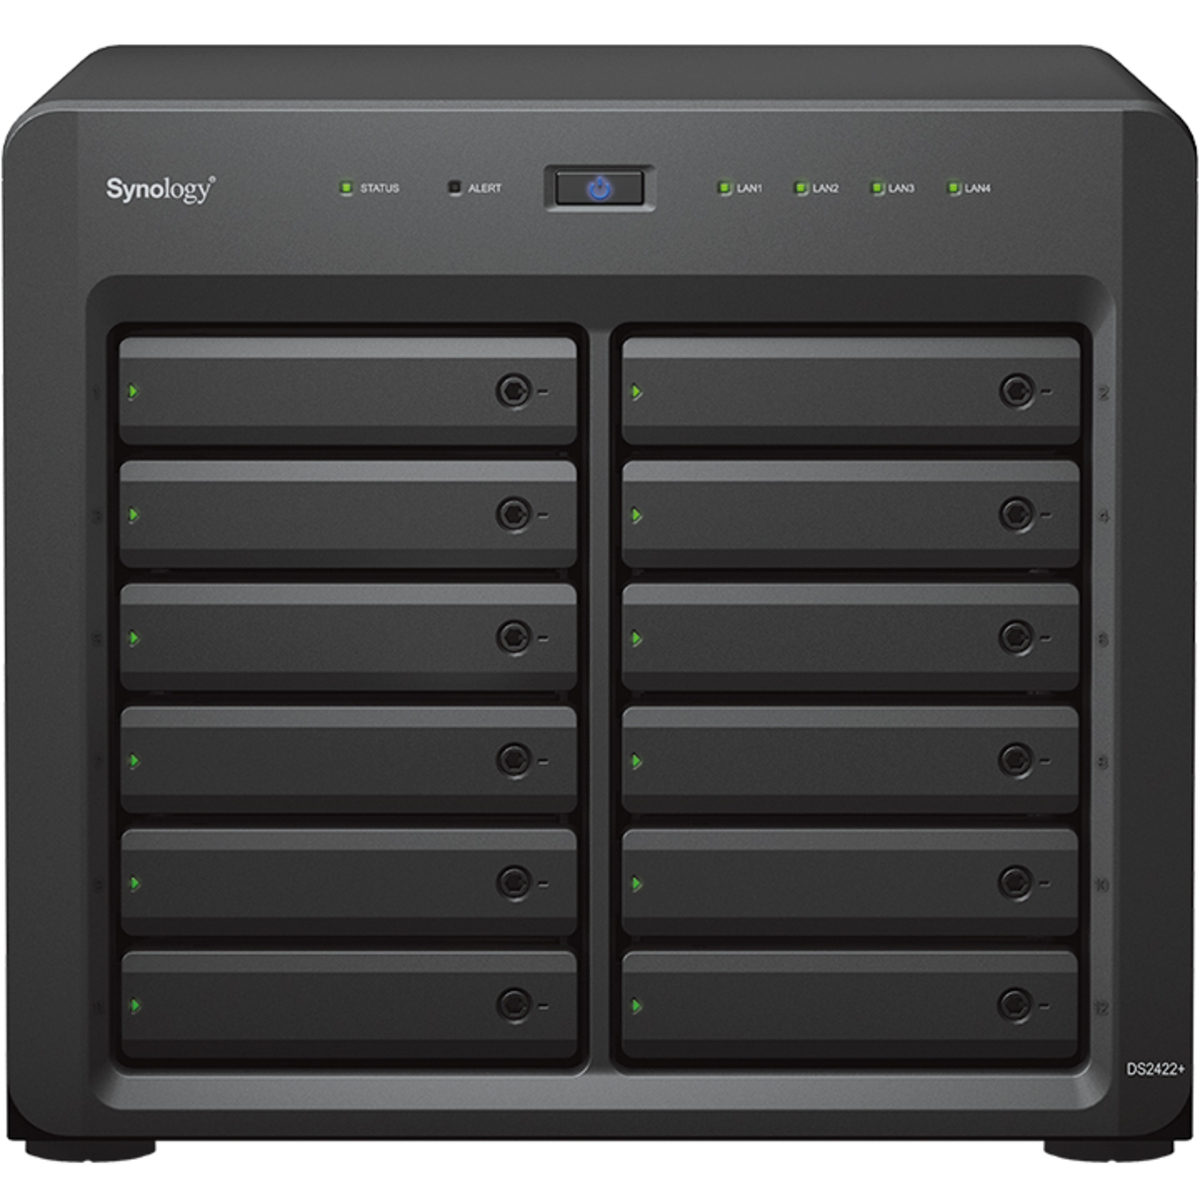 Synology DiskStation DS2422+ 80tb 12-Bay Desktop Multimedia / Power User / Business NAS - Network Attached Storage Device 10x8tb Western Digital Red Pro WD8003FFBX 3.5 7200rpm SATA 6Gb/s HDD NAS Class Drives Installed - Burn-In Tested - FREE RAM UPGRADE DiskStation DS2422+